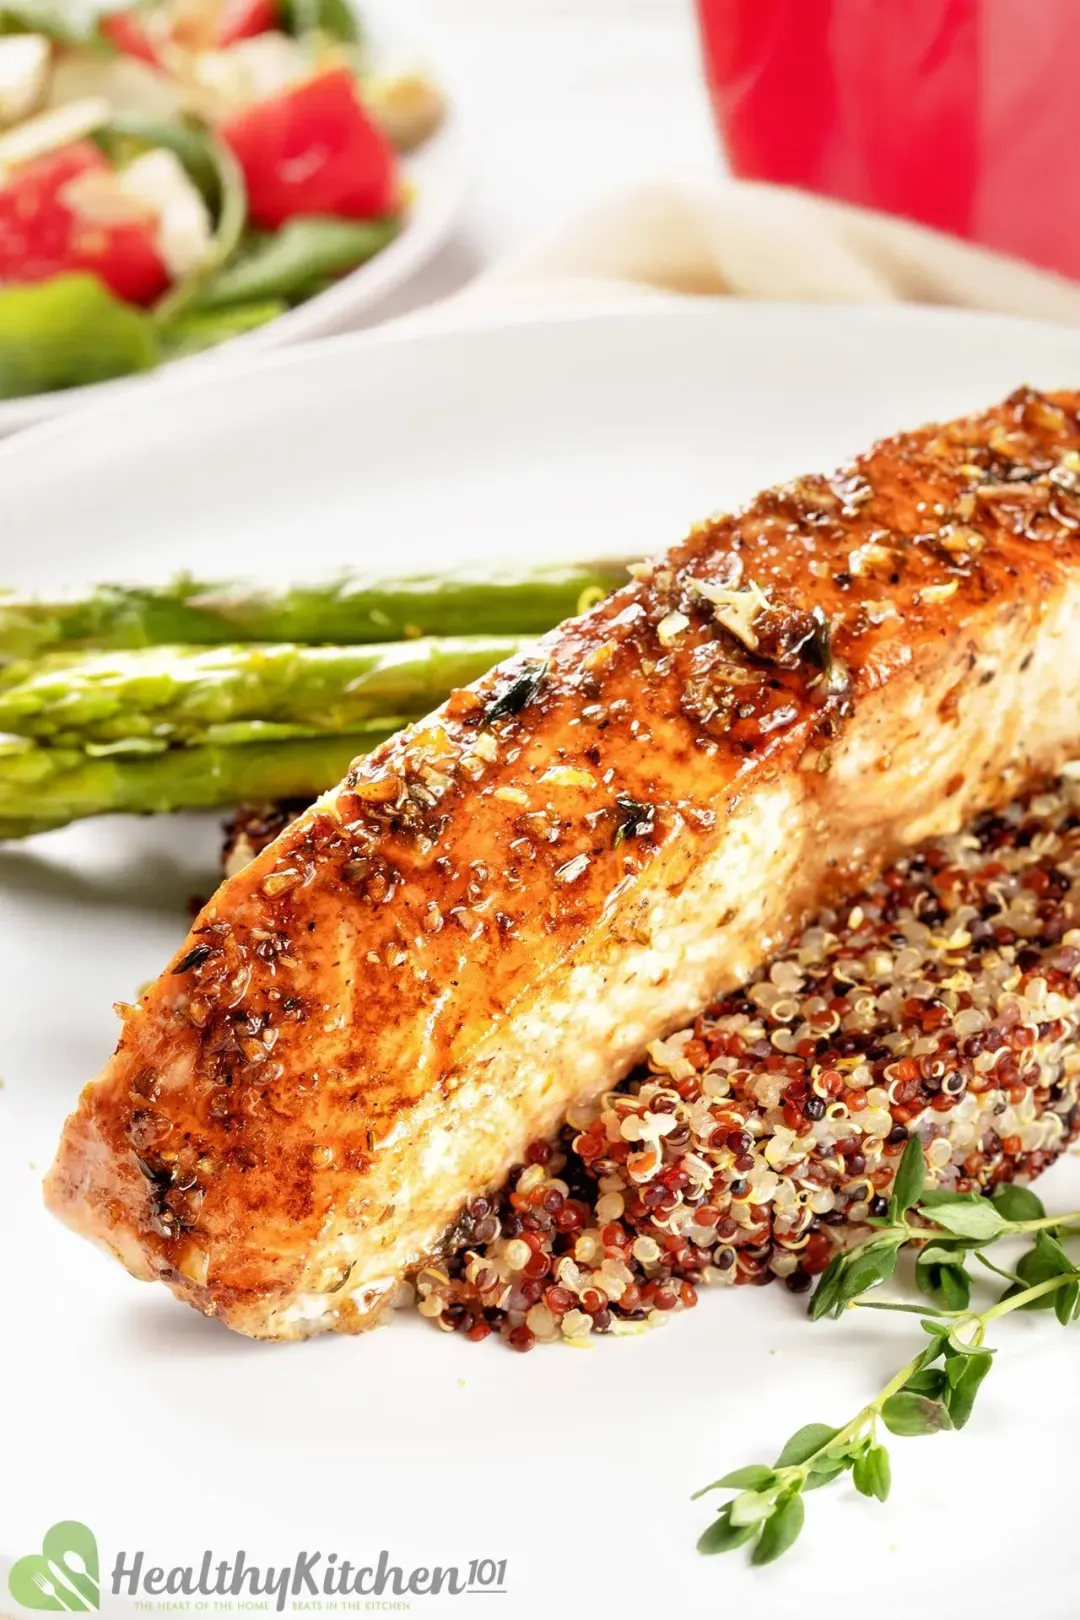 How to Make Broiled Salmon